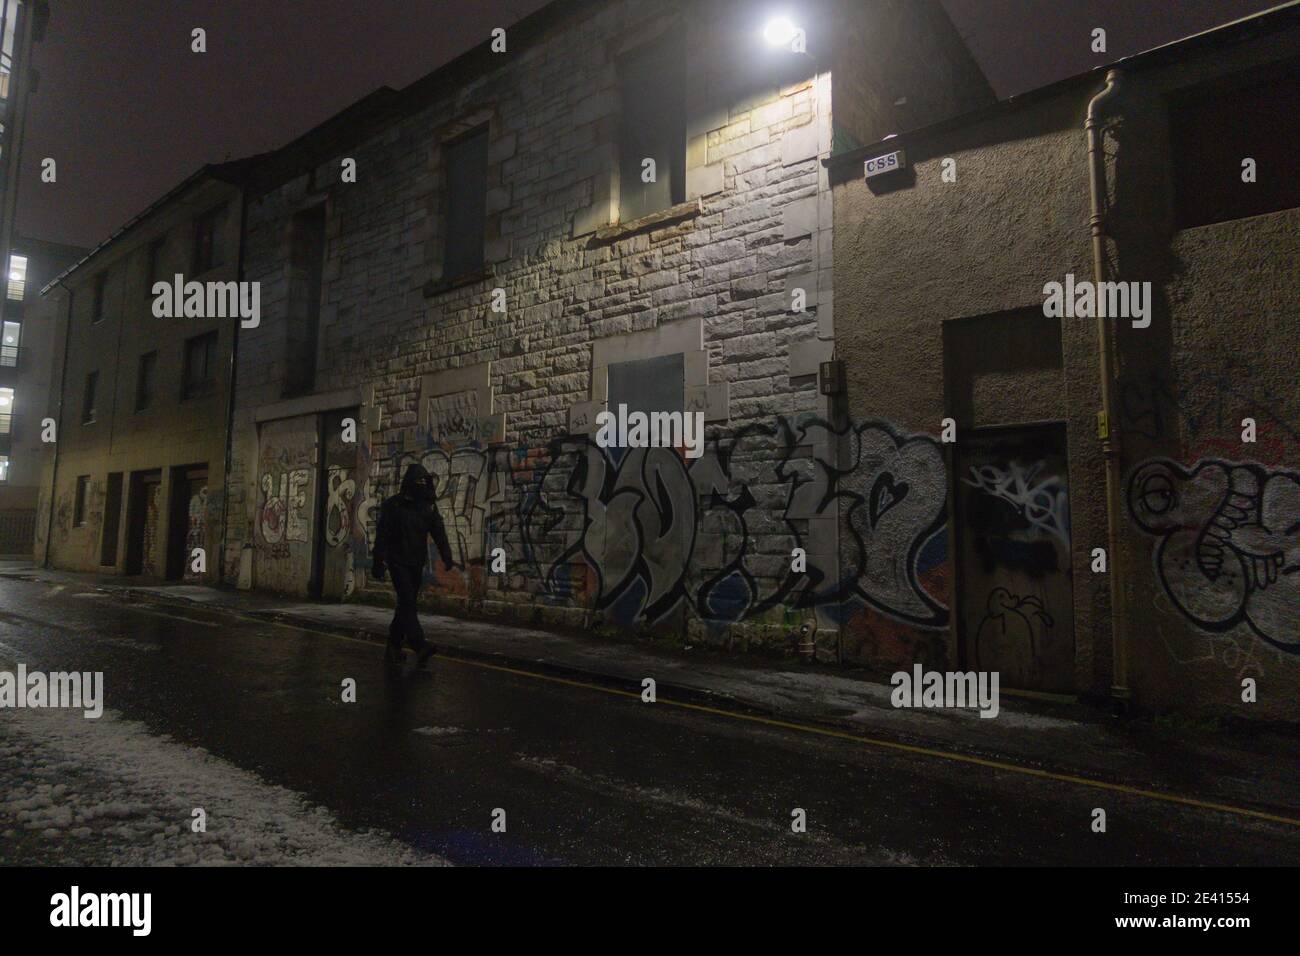 A night view of a block of flats covered in graffiti in winter Stock Photo